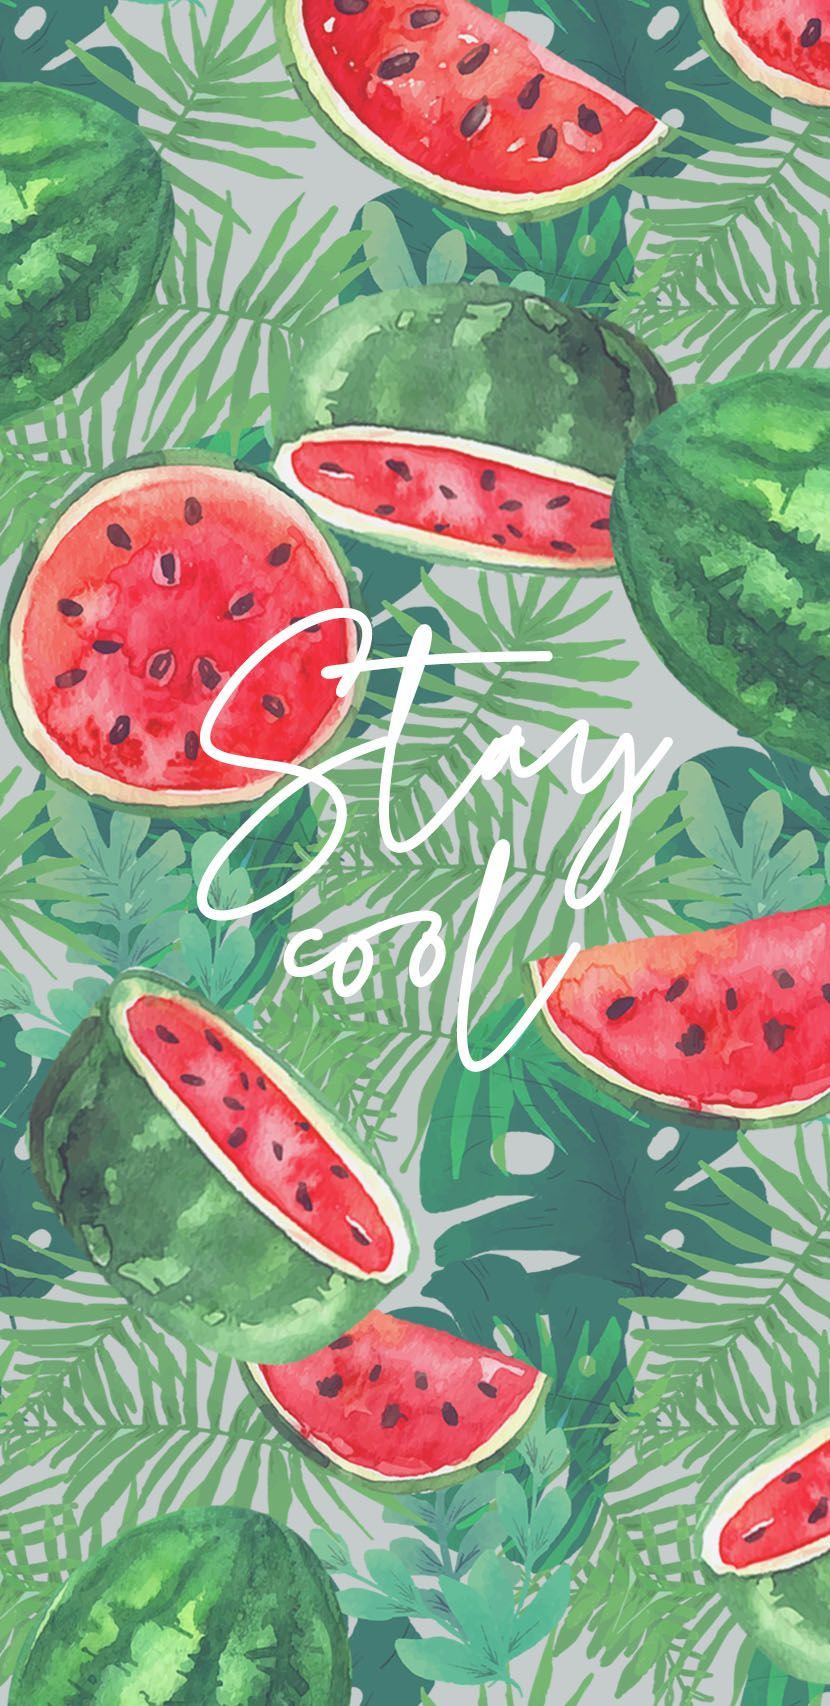 Watercolor illustration of watermelons and leaves with the words 